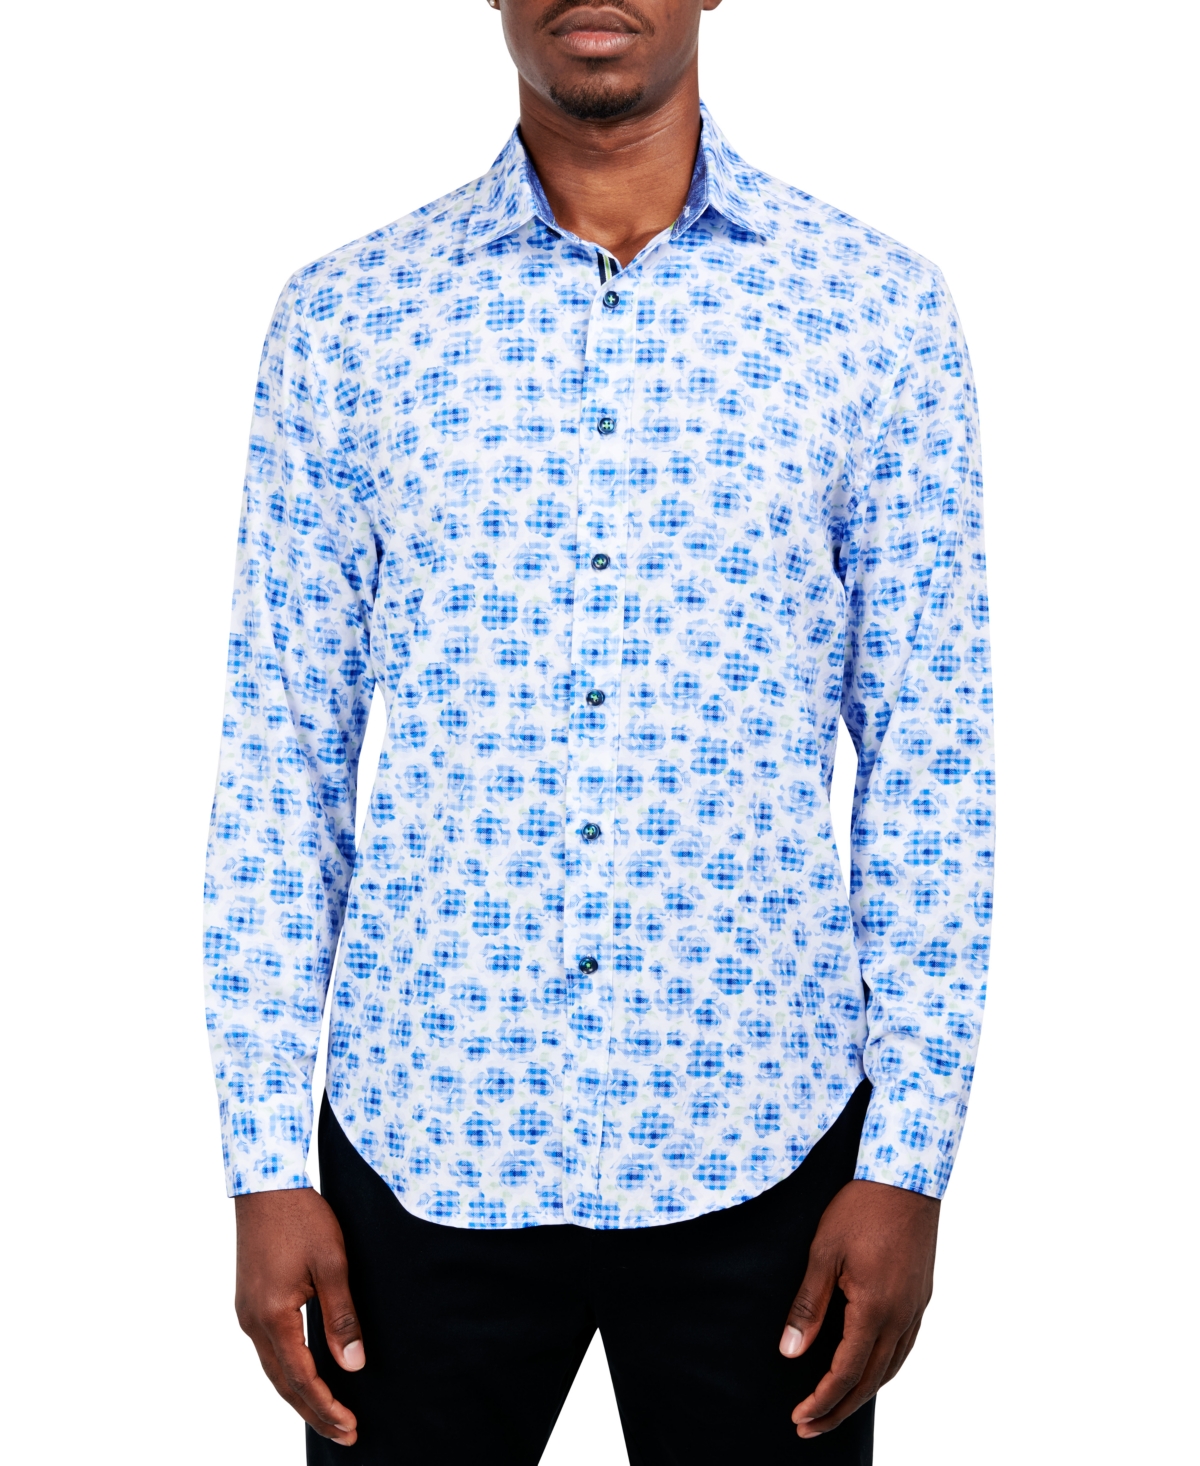 Men's Slim-Fit Performance Stretch Abstract Floral/Gingham Long-Sleeve Button-Down Shirt - White/blue